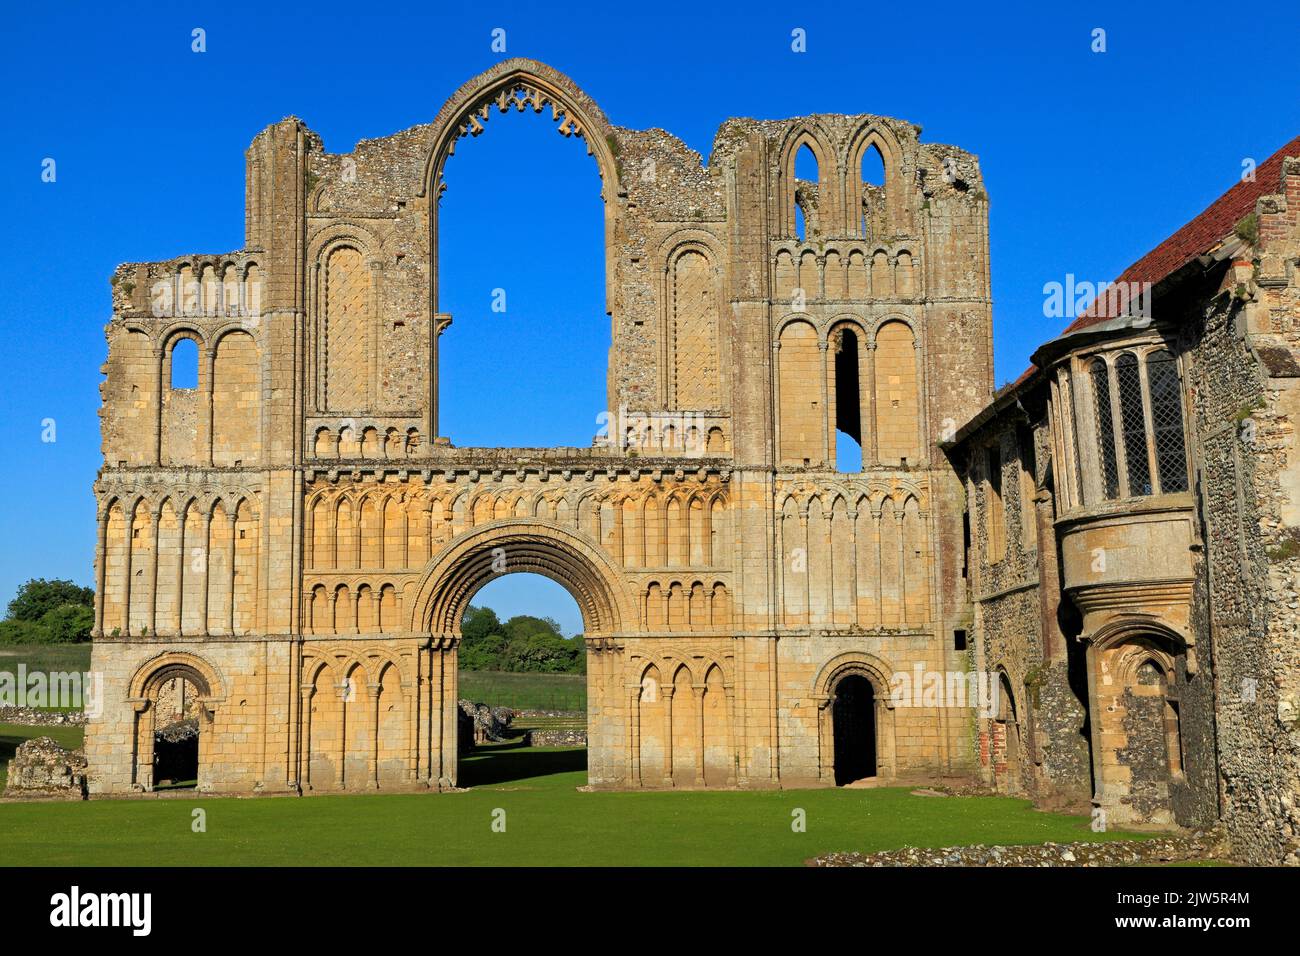 Castle Acre Priory, Norfolk, west front of priory church, and Priors Lodging, English priories, ruins, ruined, medieval, architecture Stock Photo